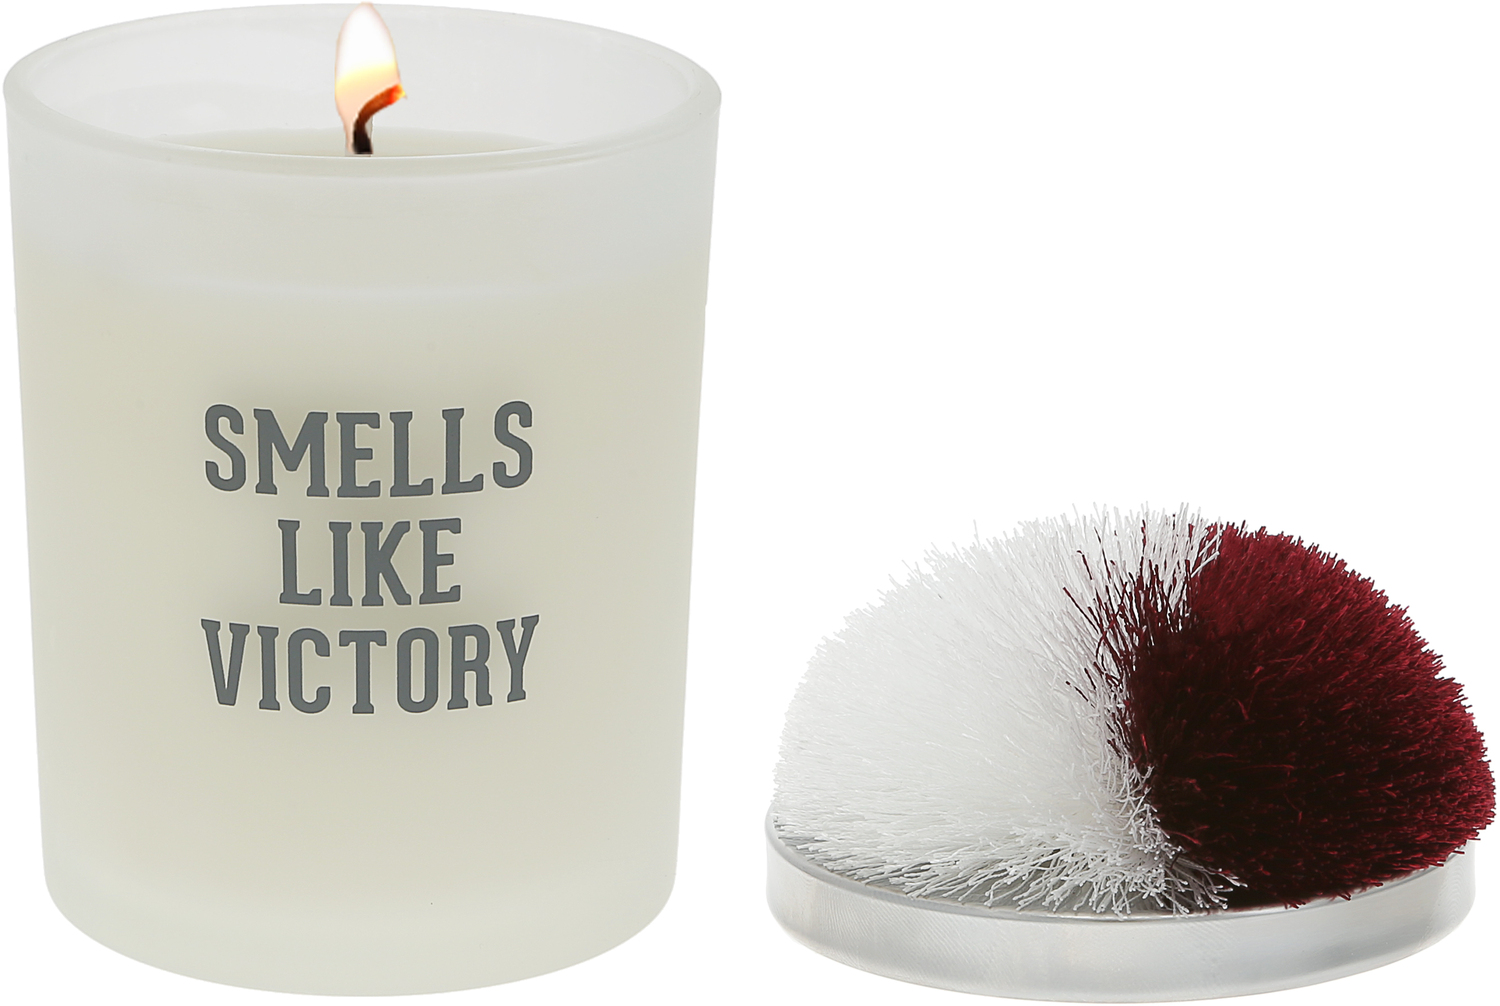 Victory - Maroon & White by Repre-Scent - Victory - Maroon & White - 5.5 oz - 100% Soy Wax Candle with Pom Pom Lid
Scent: Tranquility